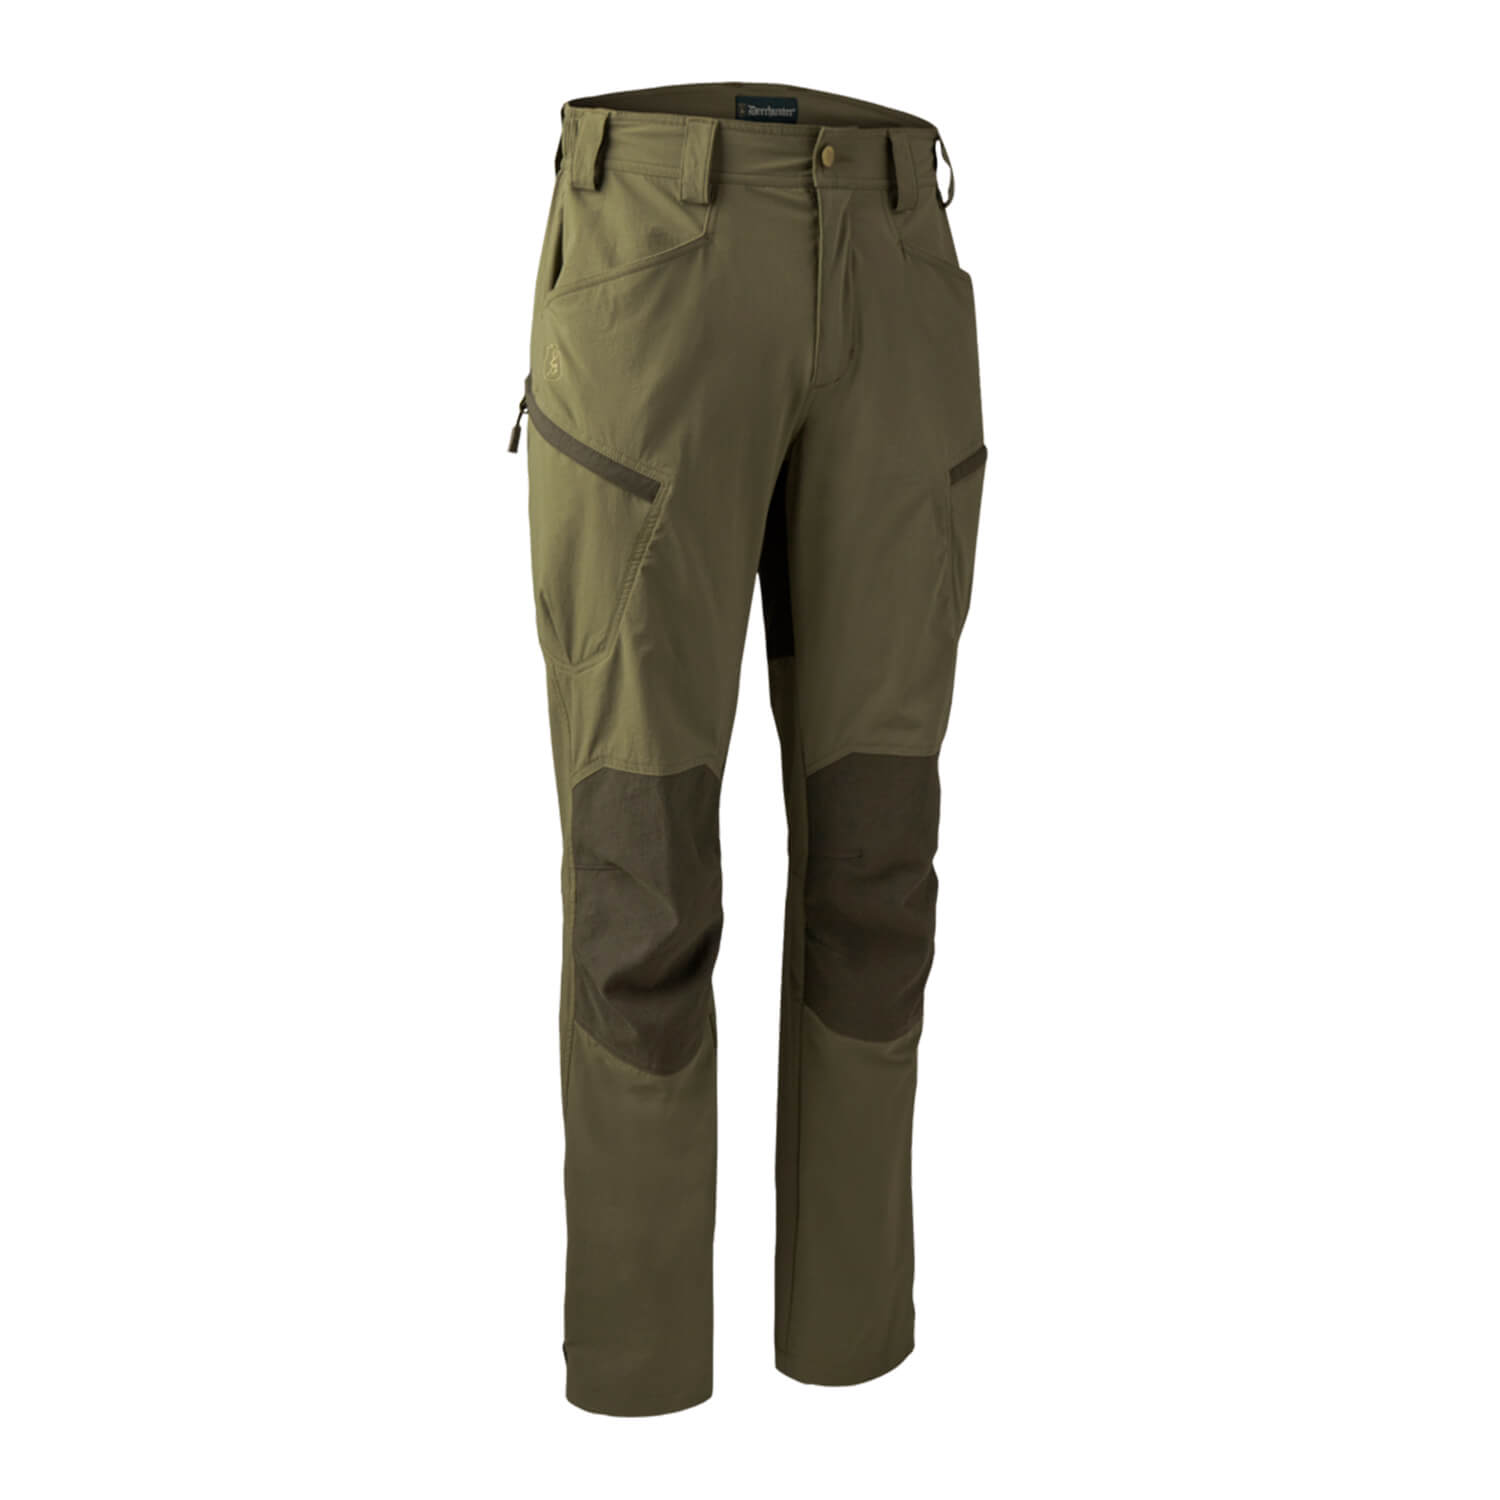 Deerhunter Trousers Anti-Insect - Insect Protection